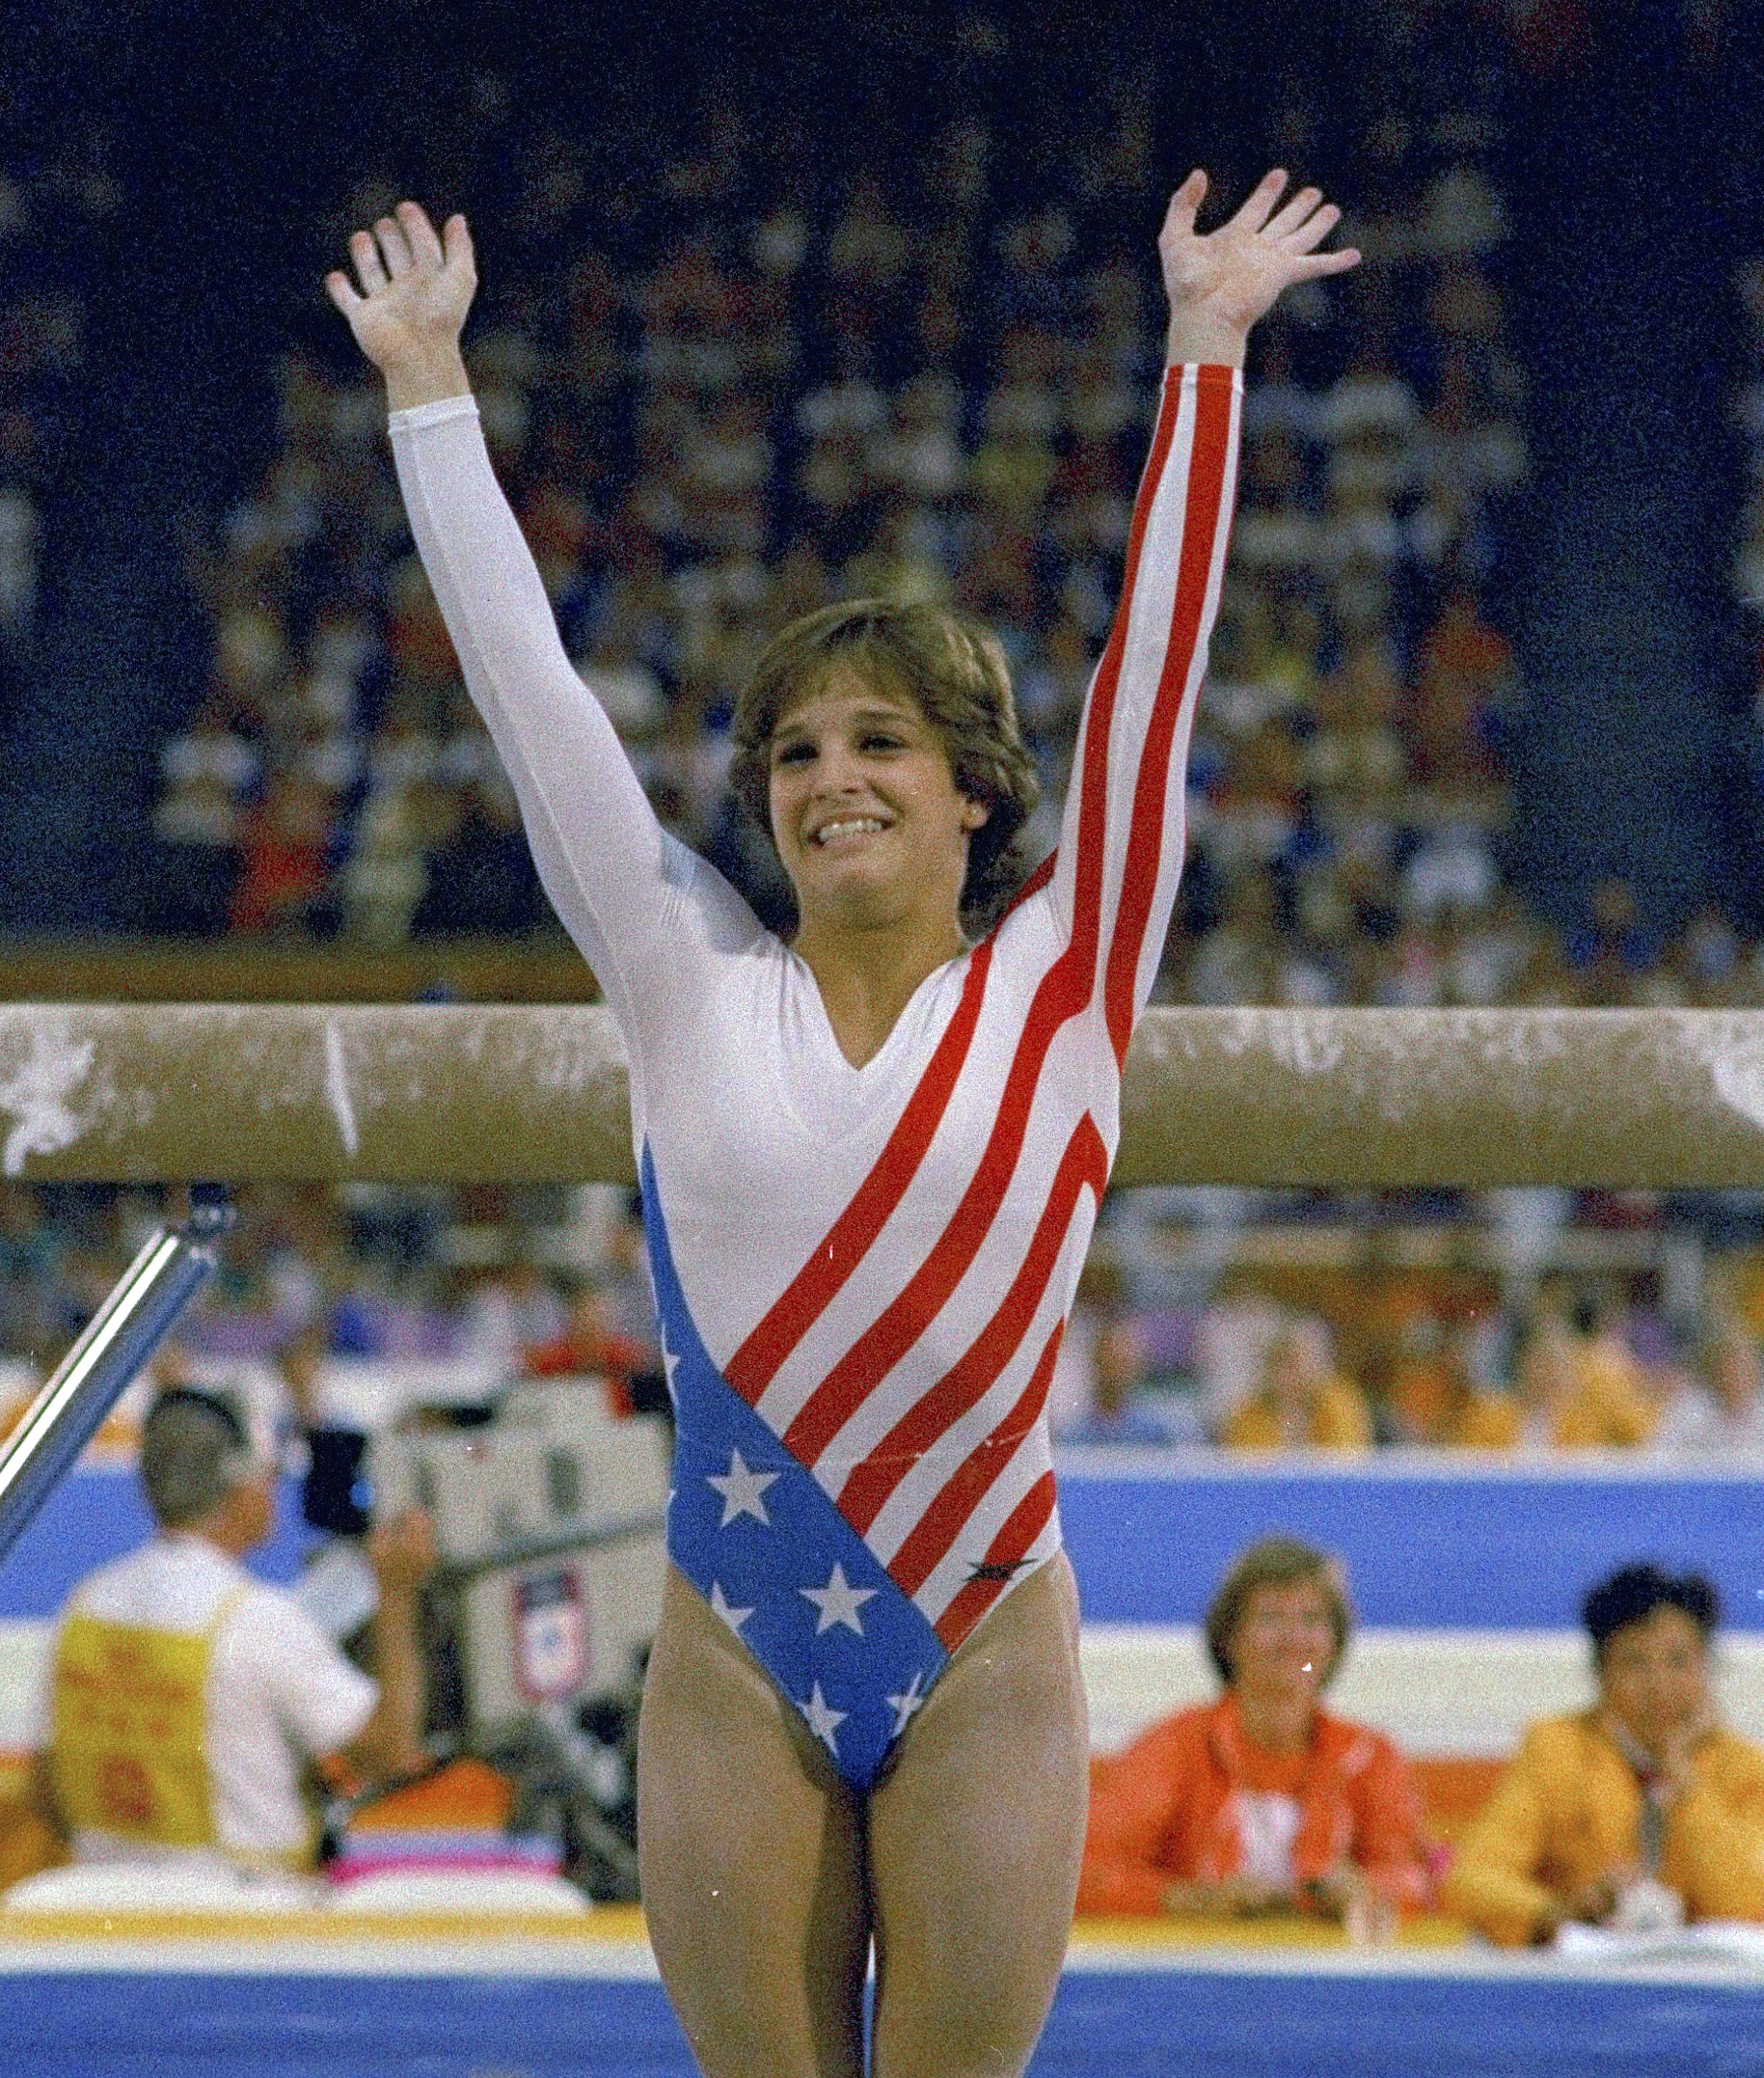 Mary Lou won gold at the 1984 Summer Olympics in Los Angeles, California